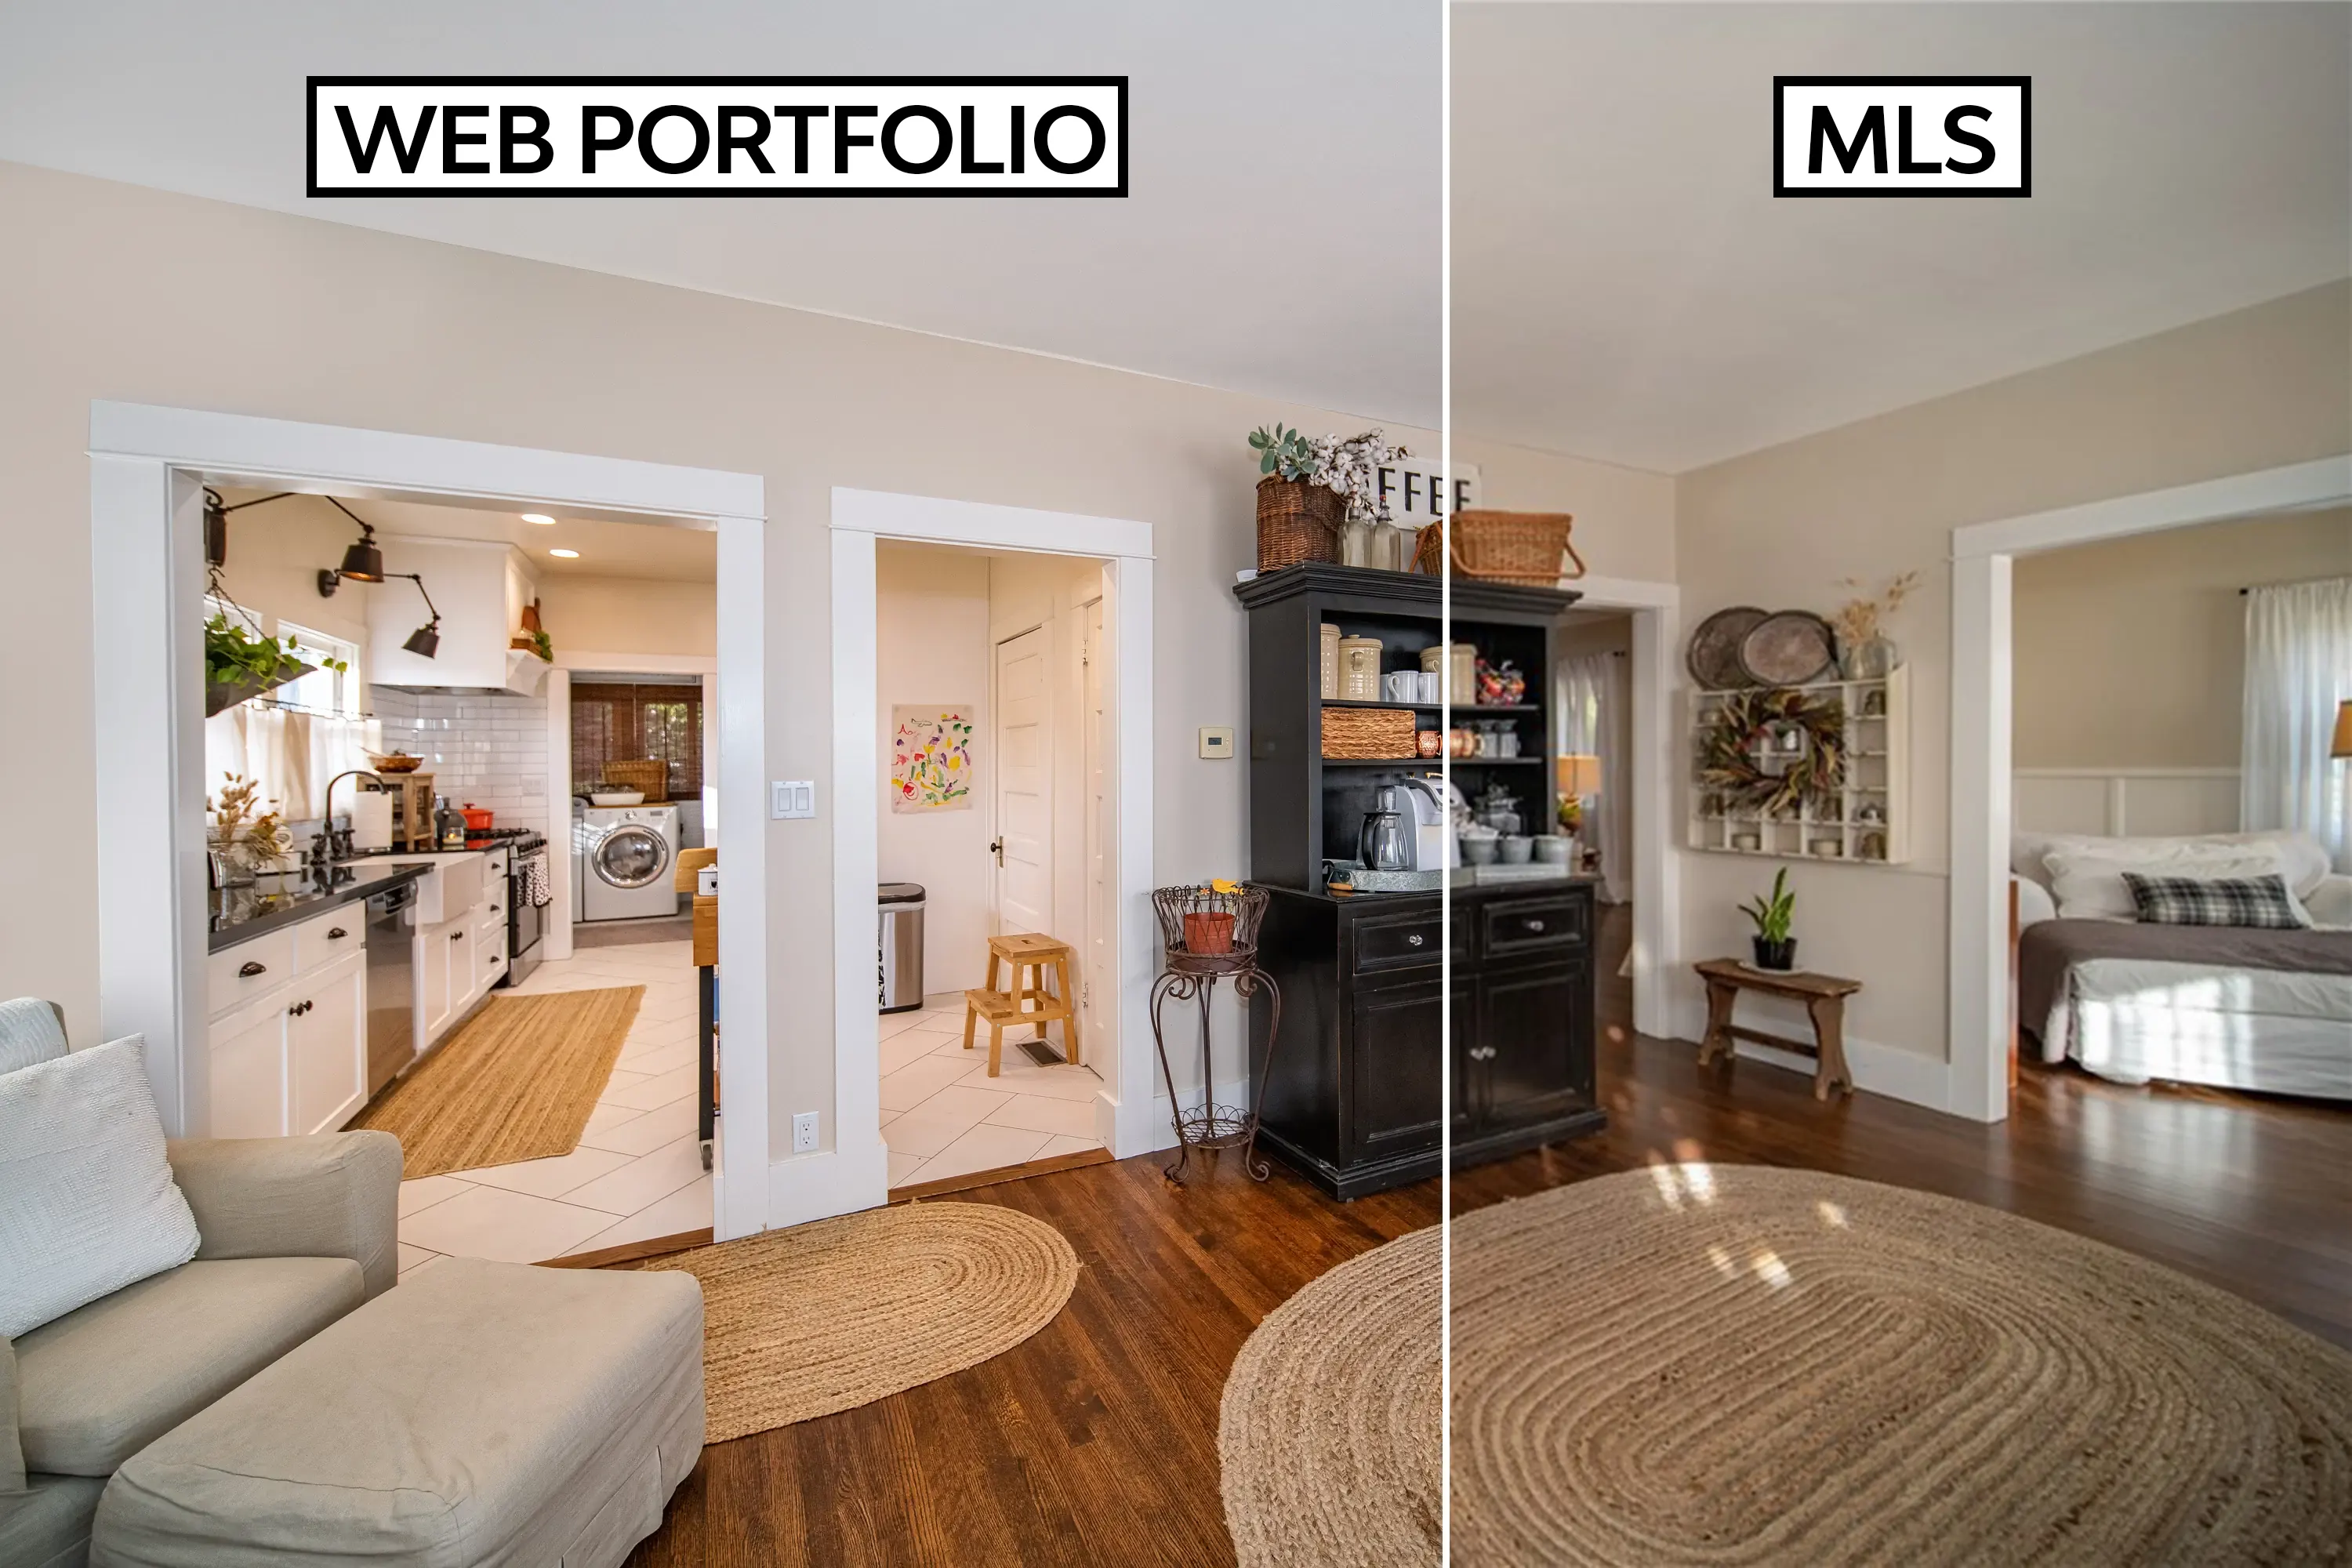 A side-by-side comparison of a living room image. The image on the left shows how the room should look and how it will appear when uploaded to the highsellhomes.com listing web portfolio. The image on the right demonstrates how the same image is compressed and degraded when uploaded to the MLS. This comparison illustrates the importance of high-quality images in real estate listings and highlights the superior image quality that can be achieved with highsellhomes.com.